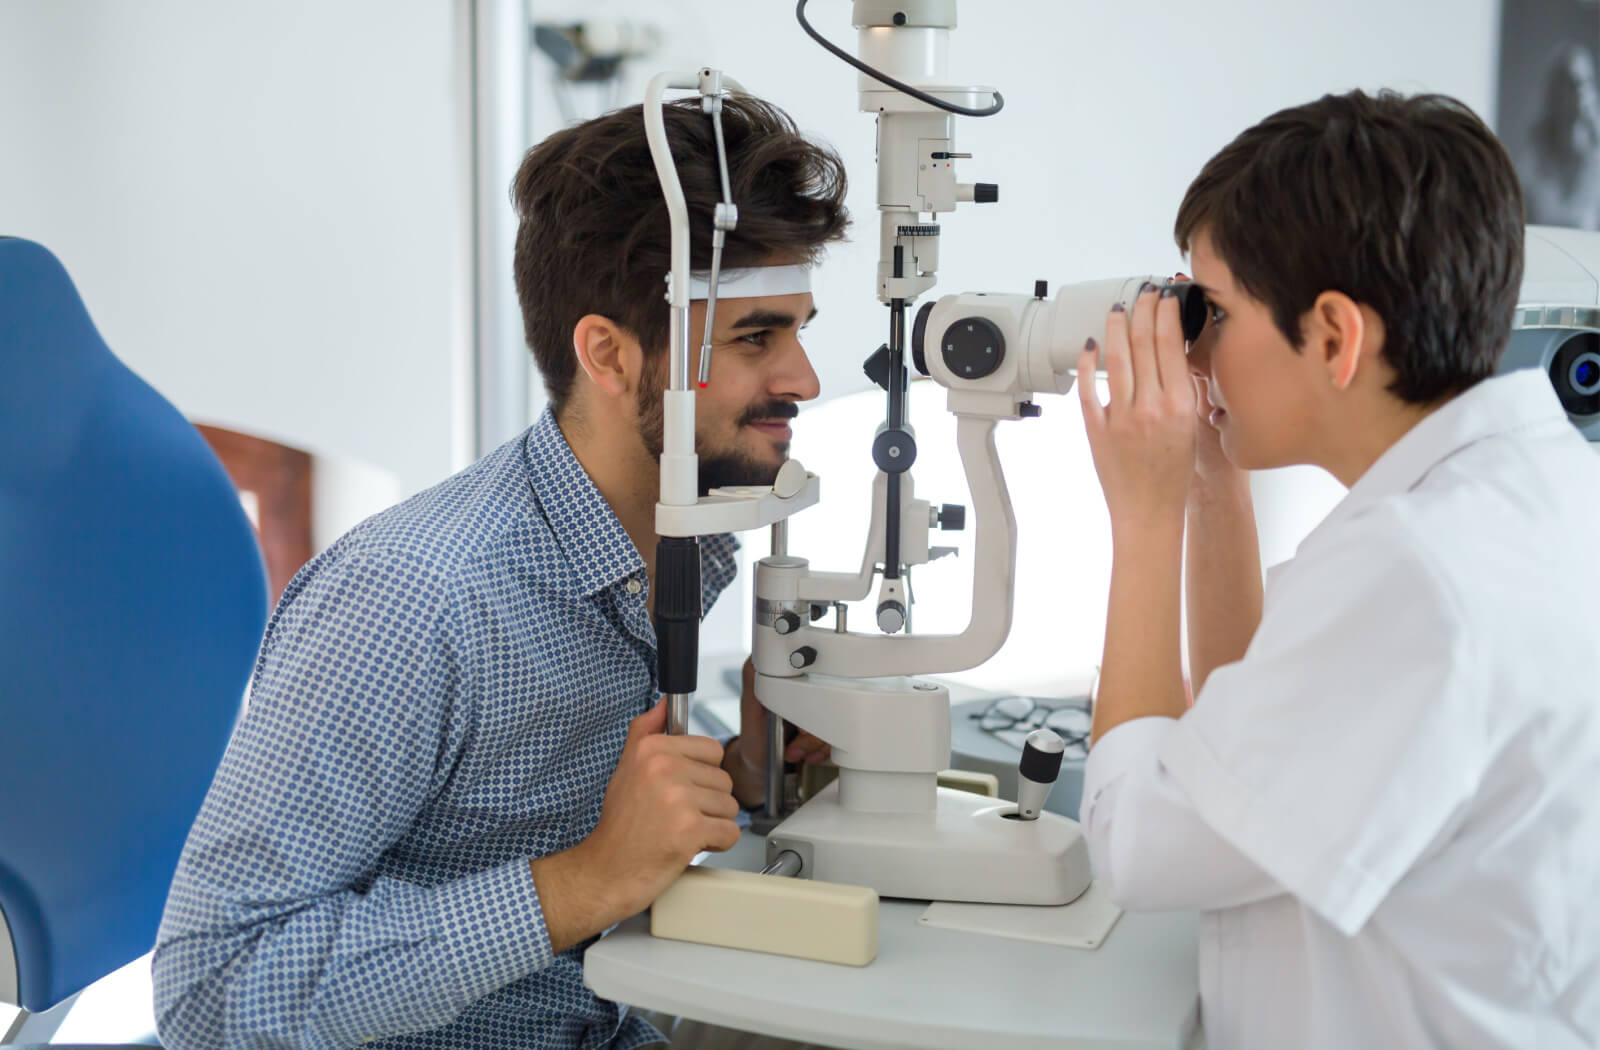 A female optometrist using a medical device to examine the eyes of a male patient and look for potential eye problems.